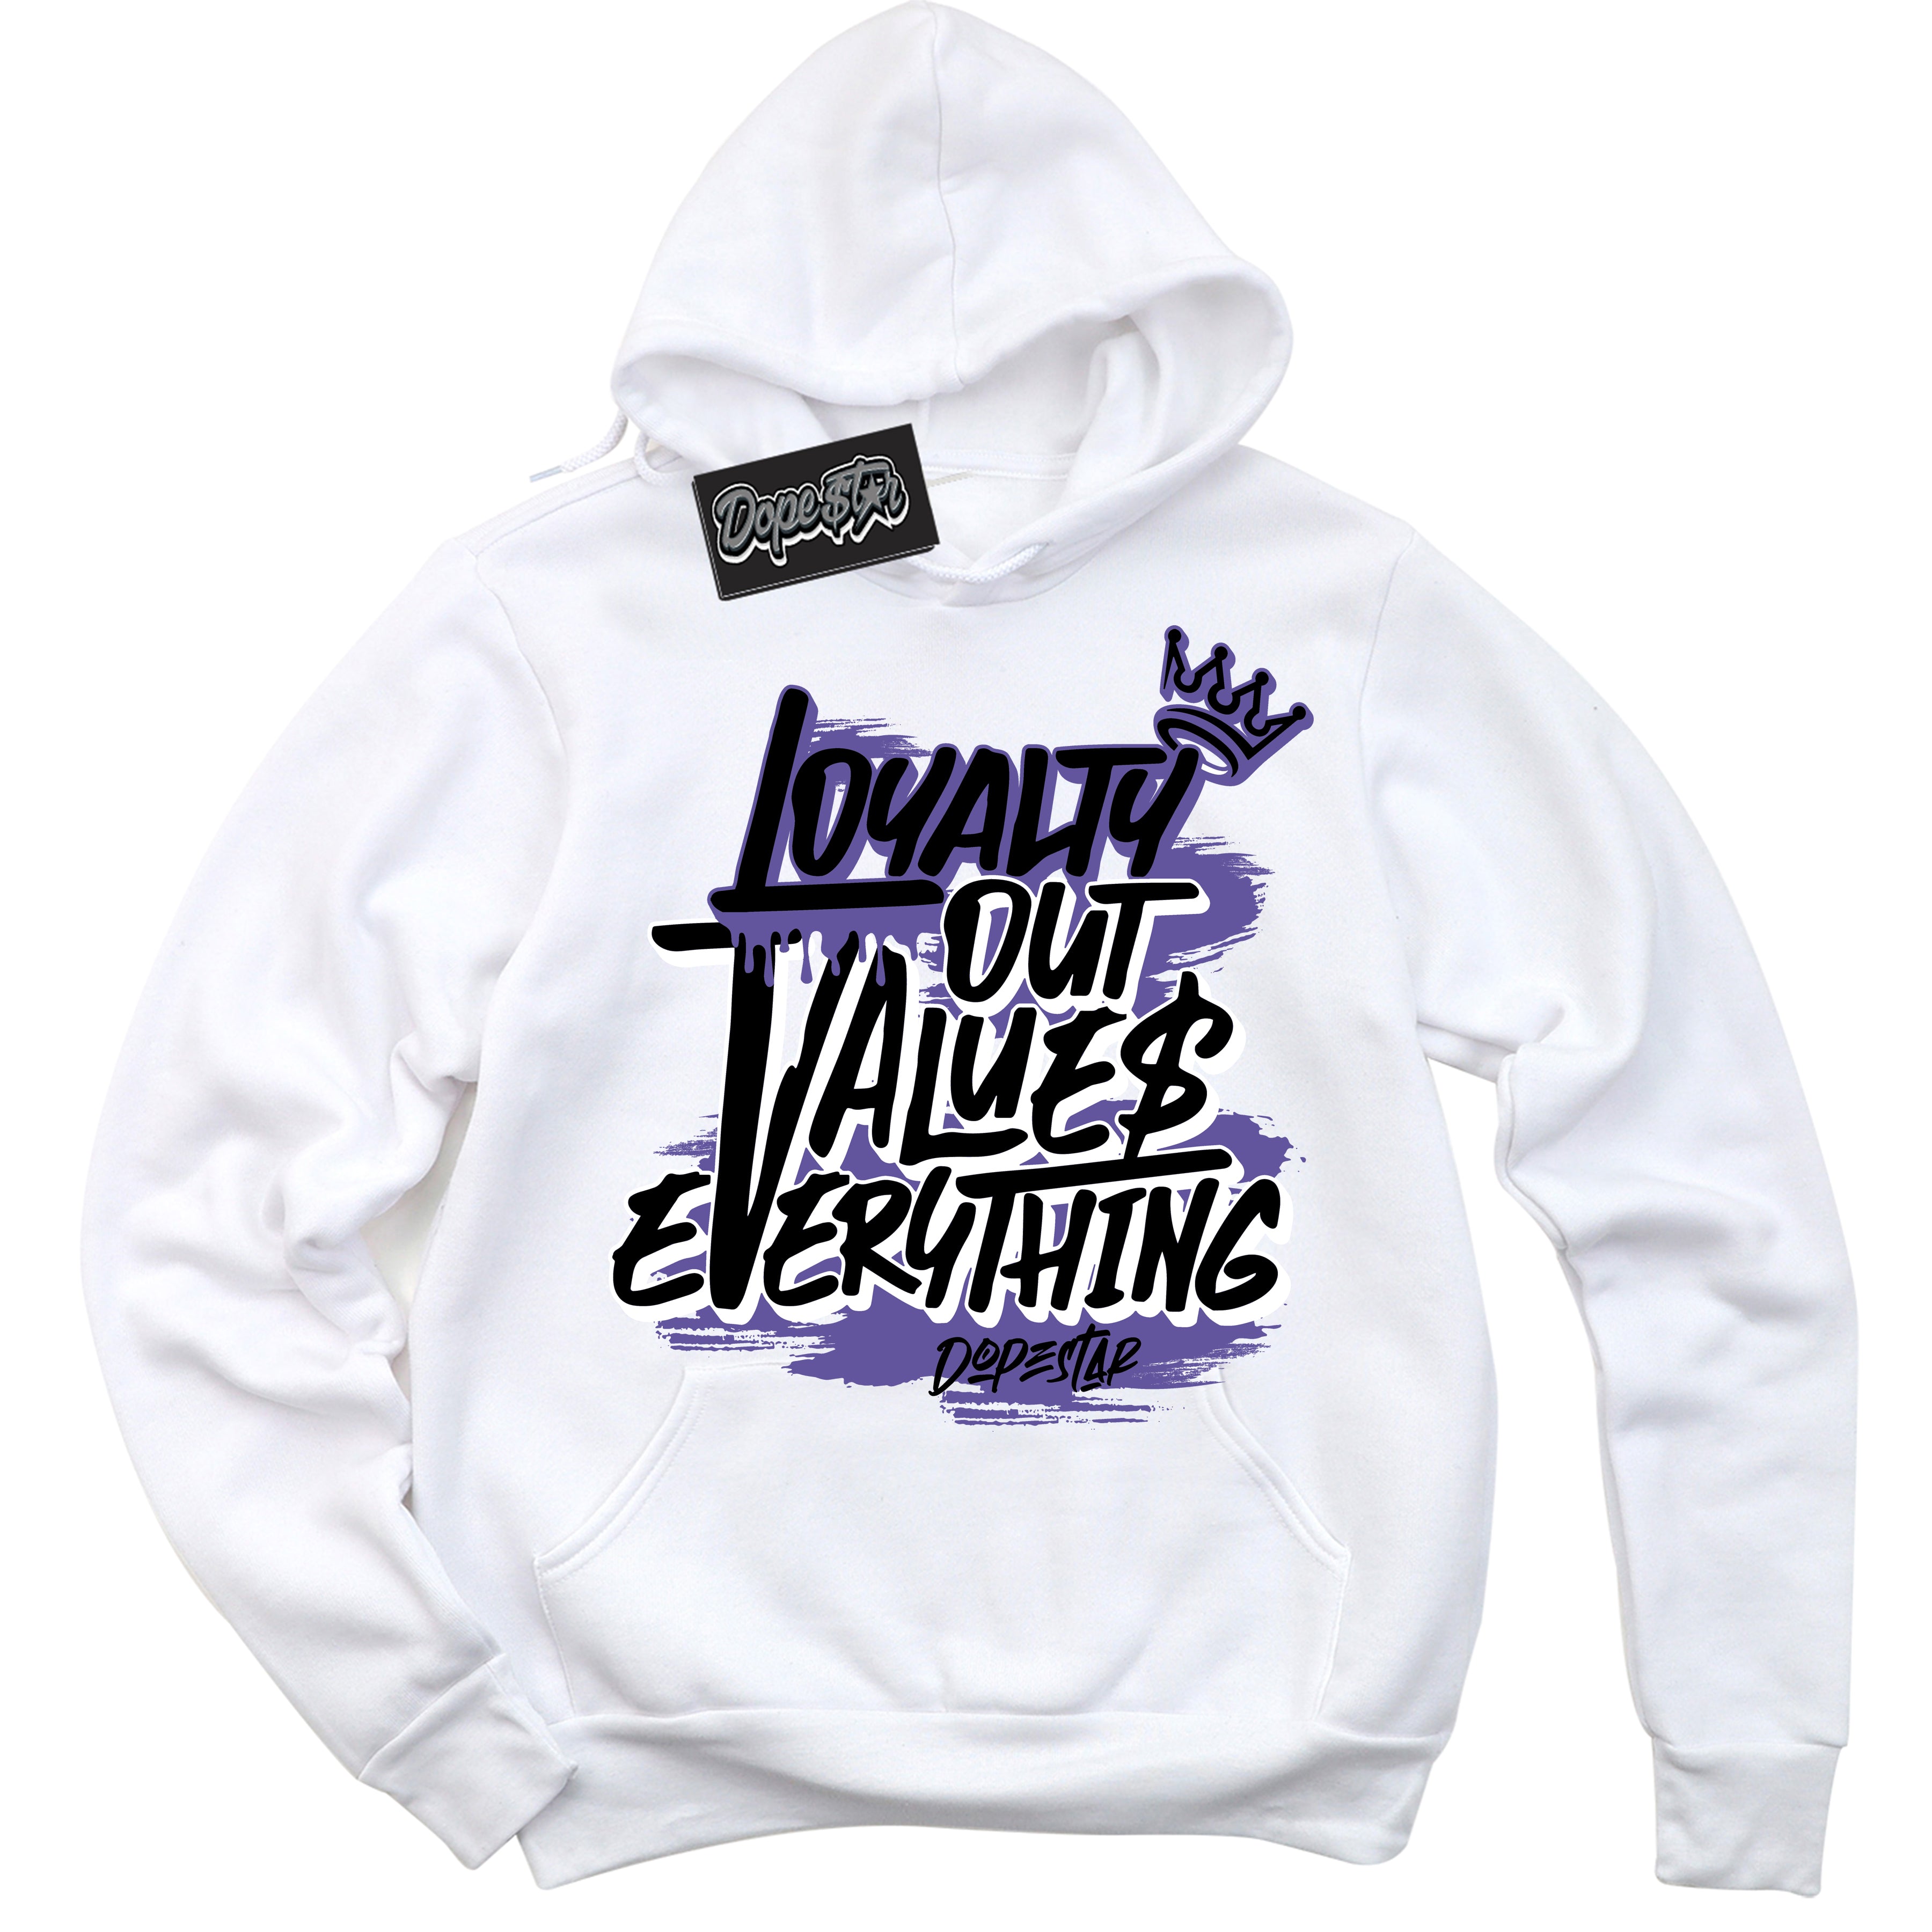 Cool White Hoodie with “ Loyalty Out Values Everything ”  design that Perfectly Matches Psychic Purple Sneakers.